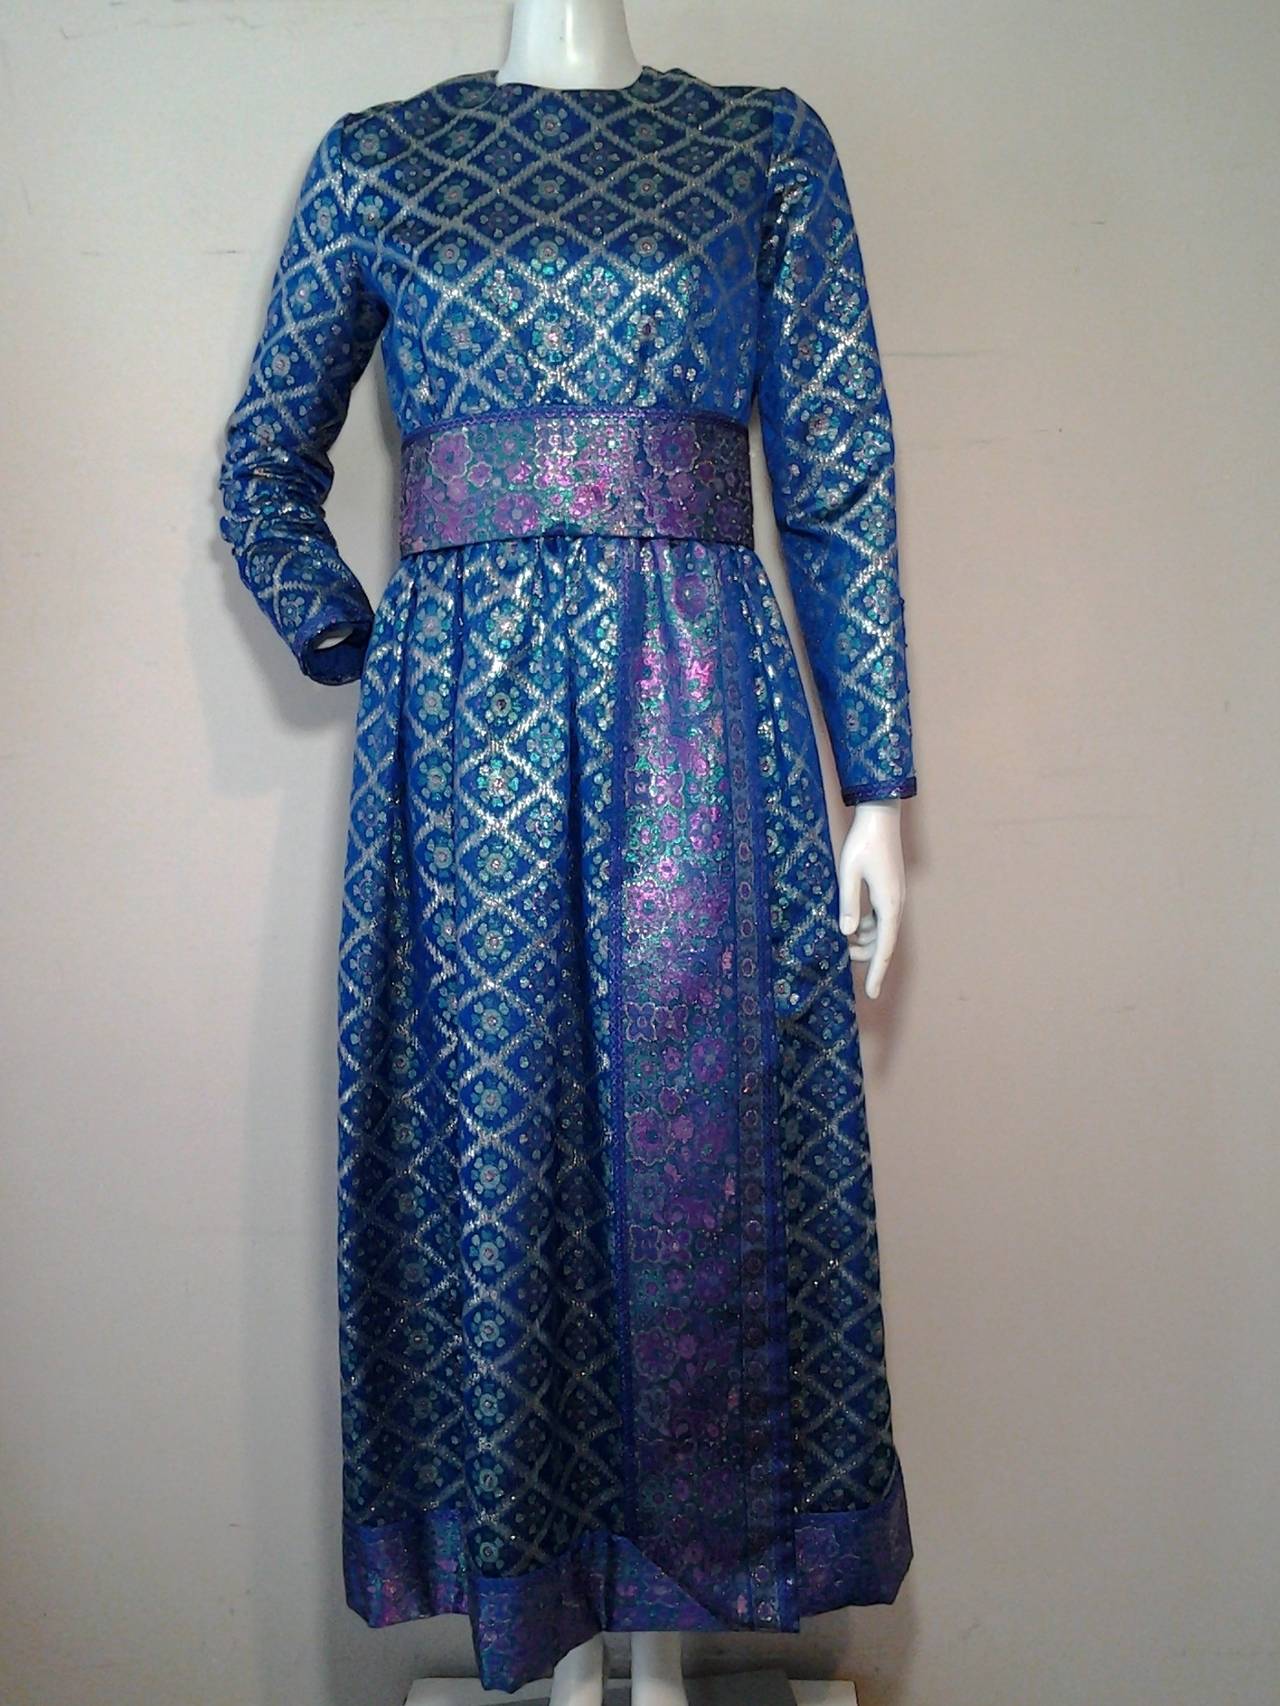 A beautiful 1960s Oscar de la Renta aqua, fuchsia and silver brocade gown with long sleeves and an obi-inspired waist band and long sash detail. Completely lined.  Originally sold at Montalvo's.